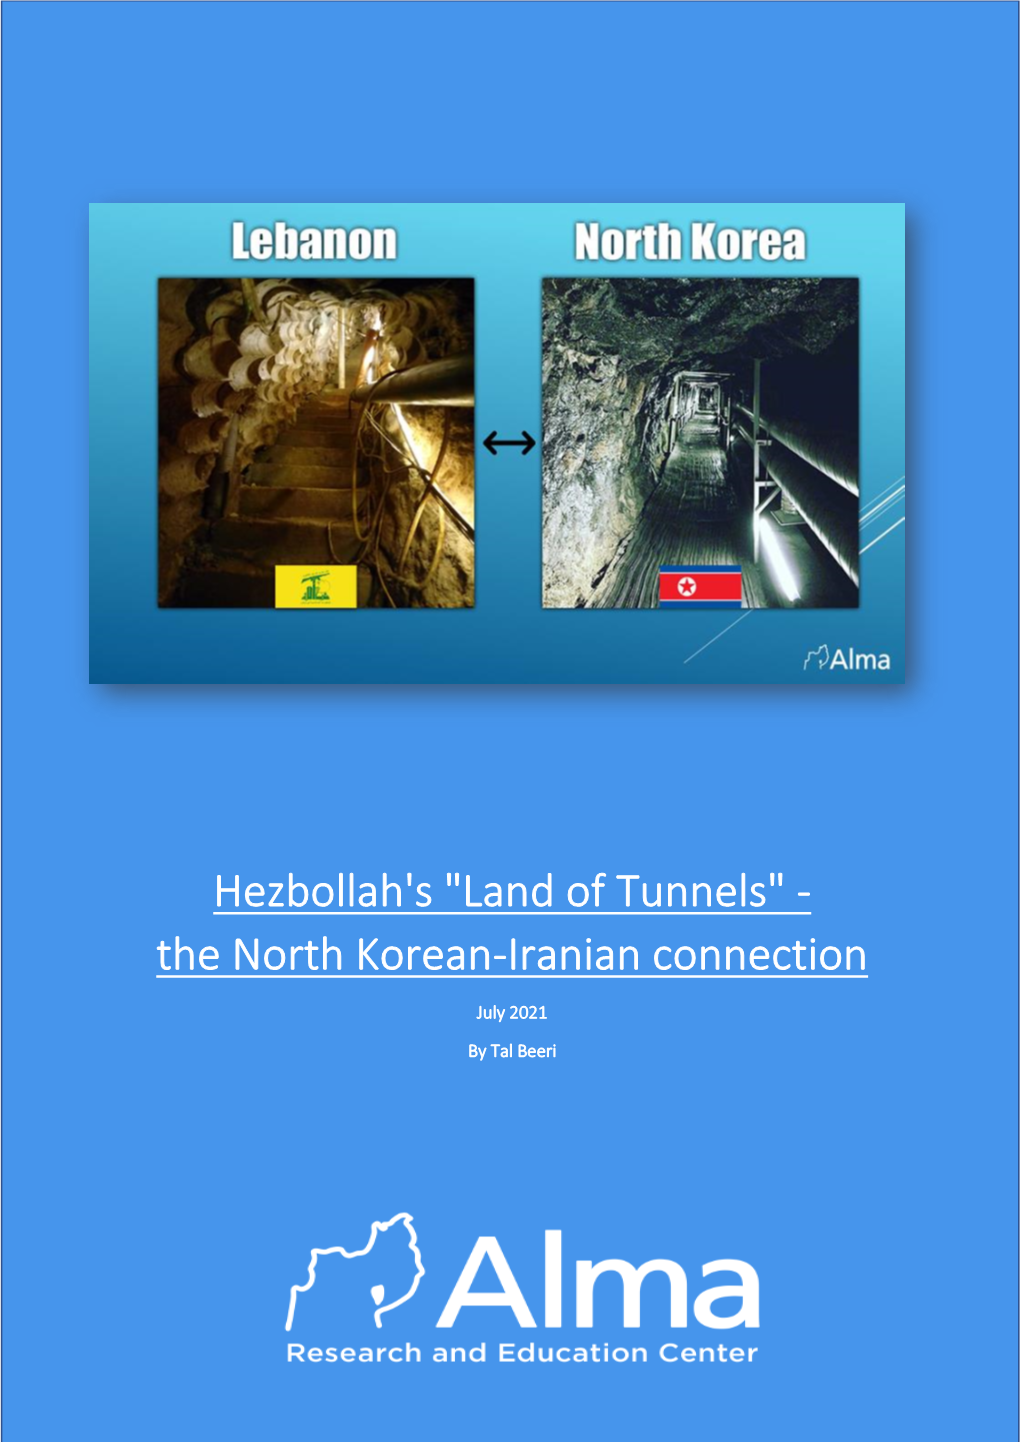 Hezbollah's "Land of Tunnels" - the North Korean-Iranian Connection